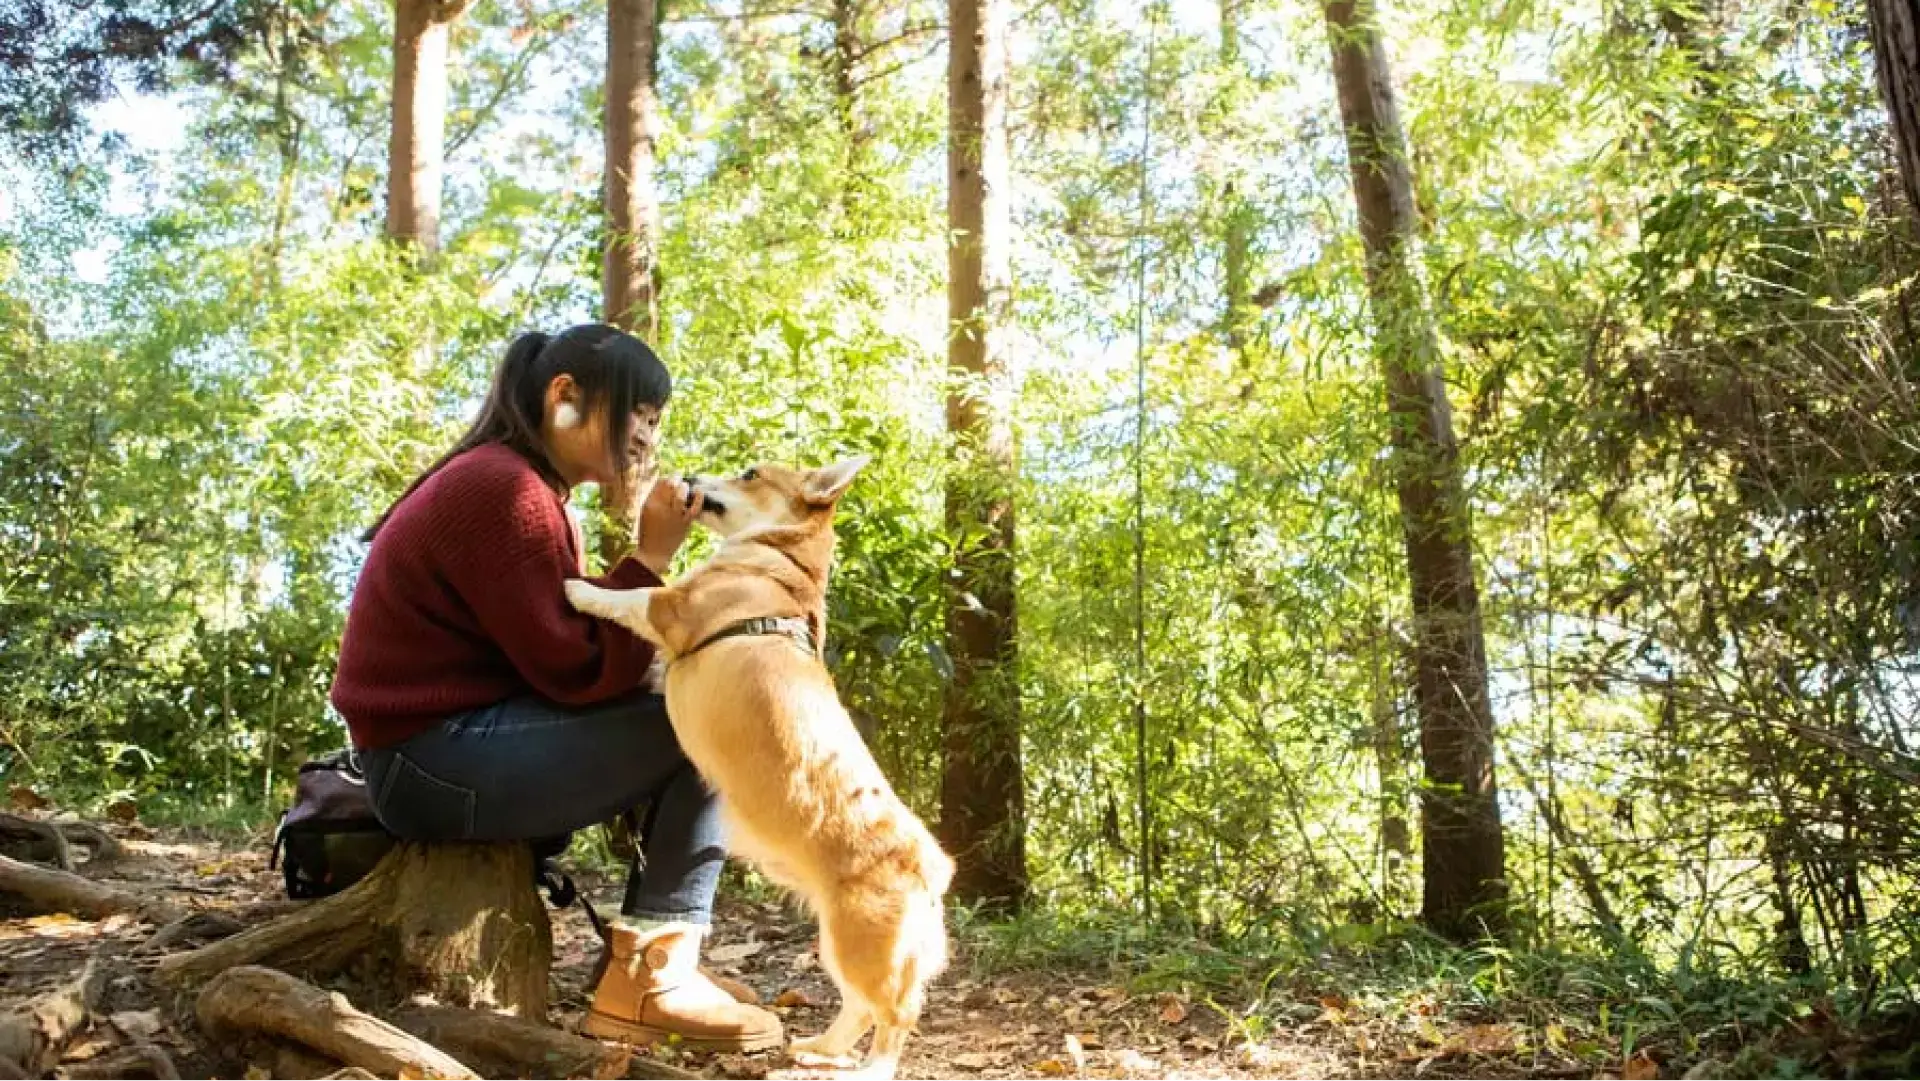 A person sitting on a tree stump while on a walk in the woods with a dog.